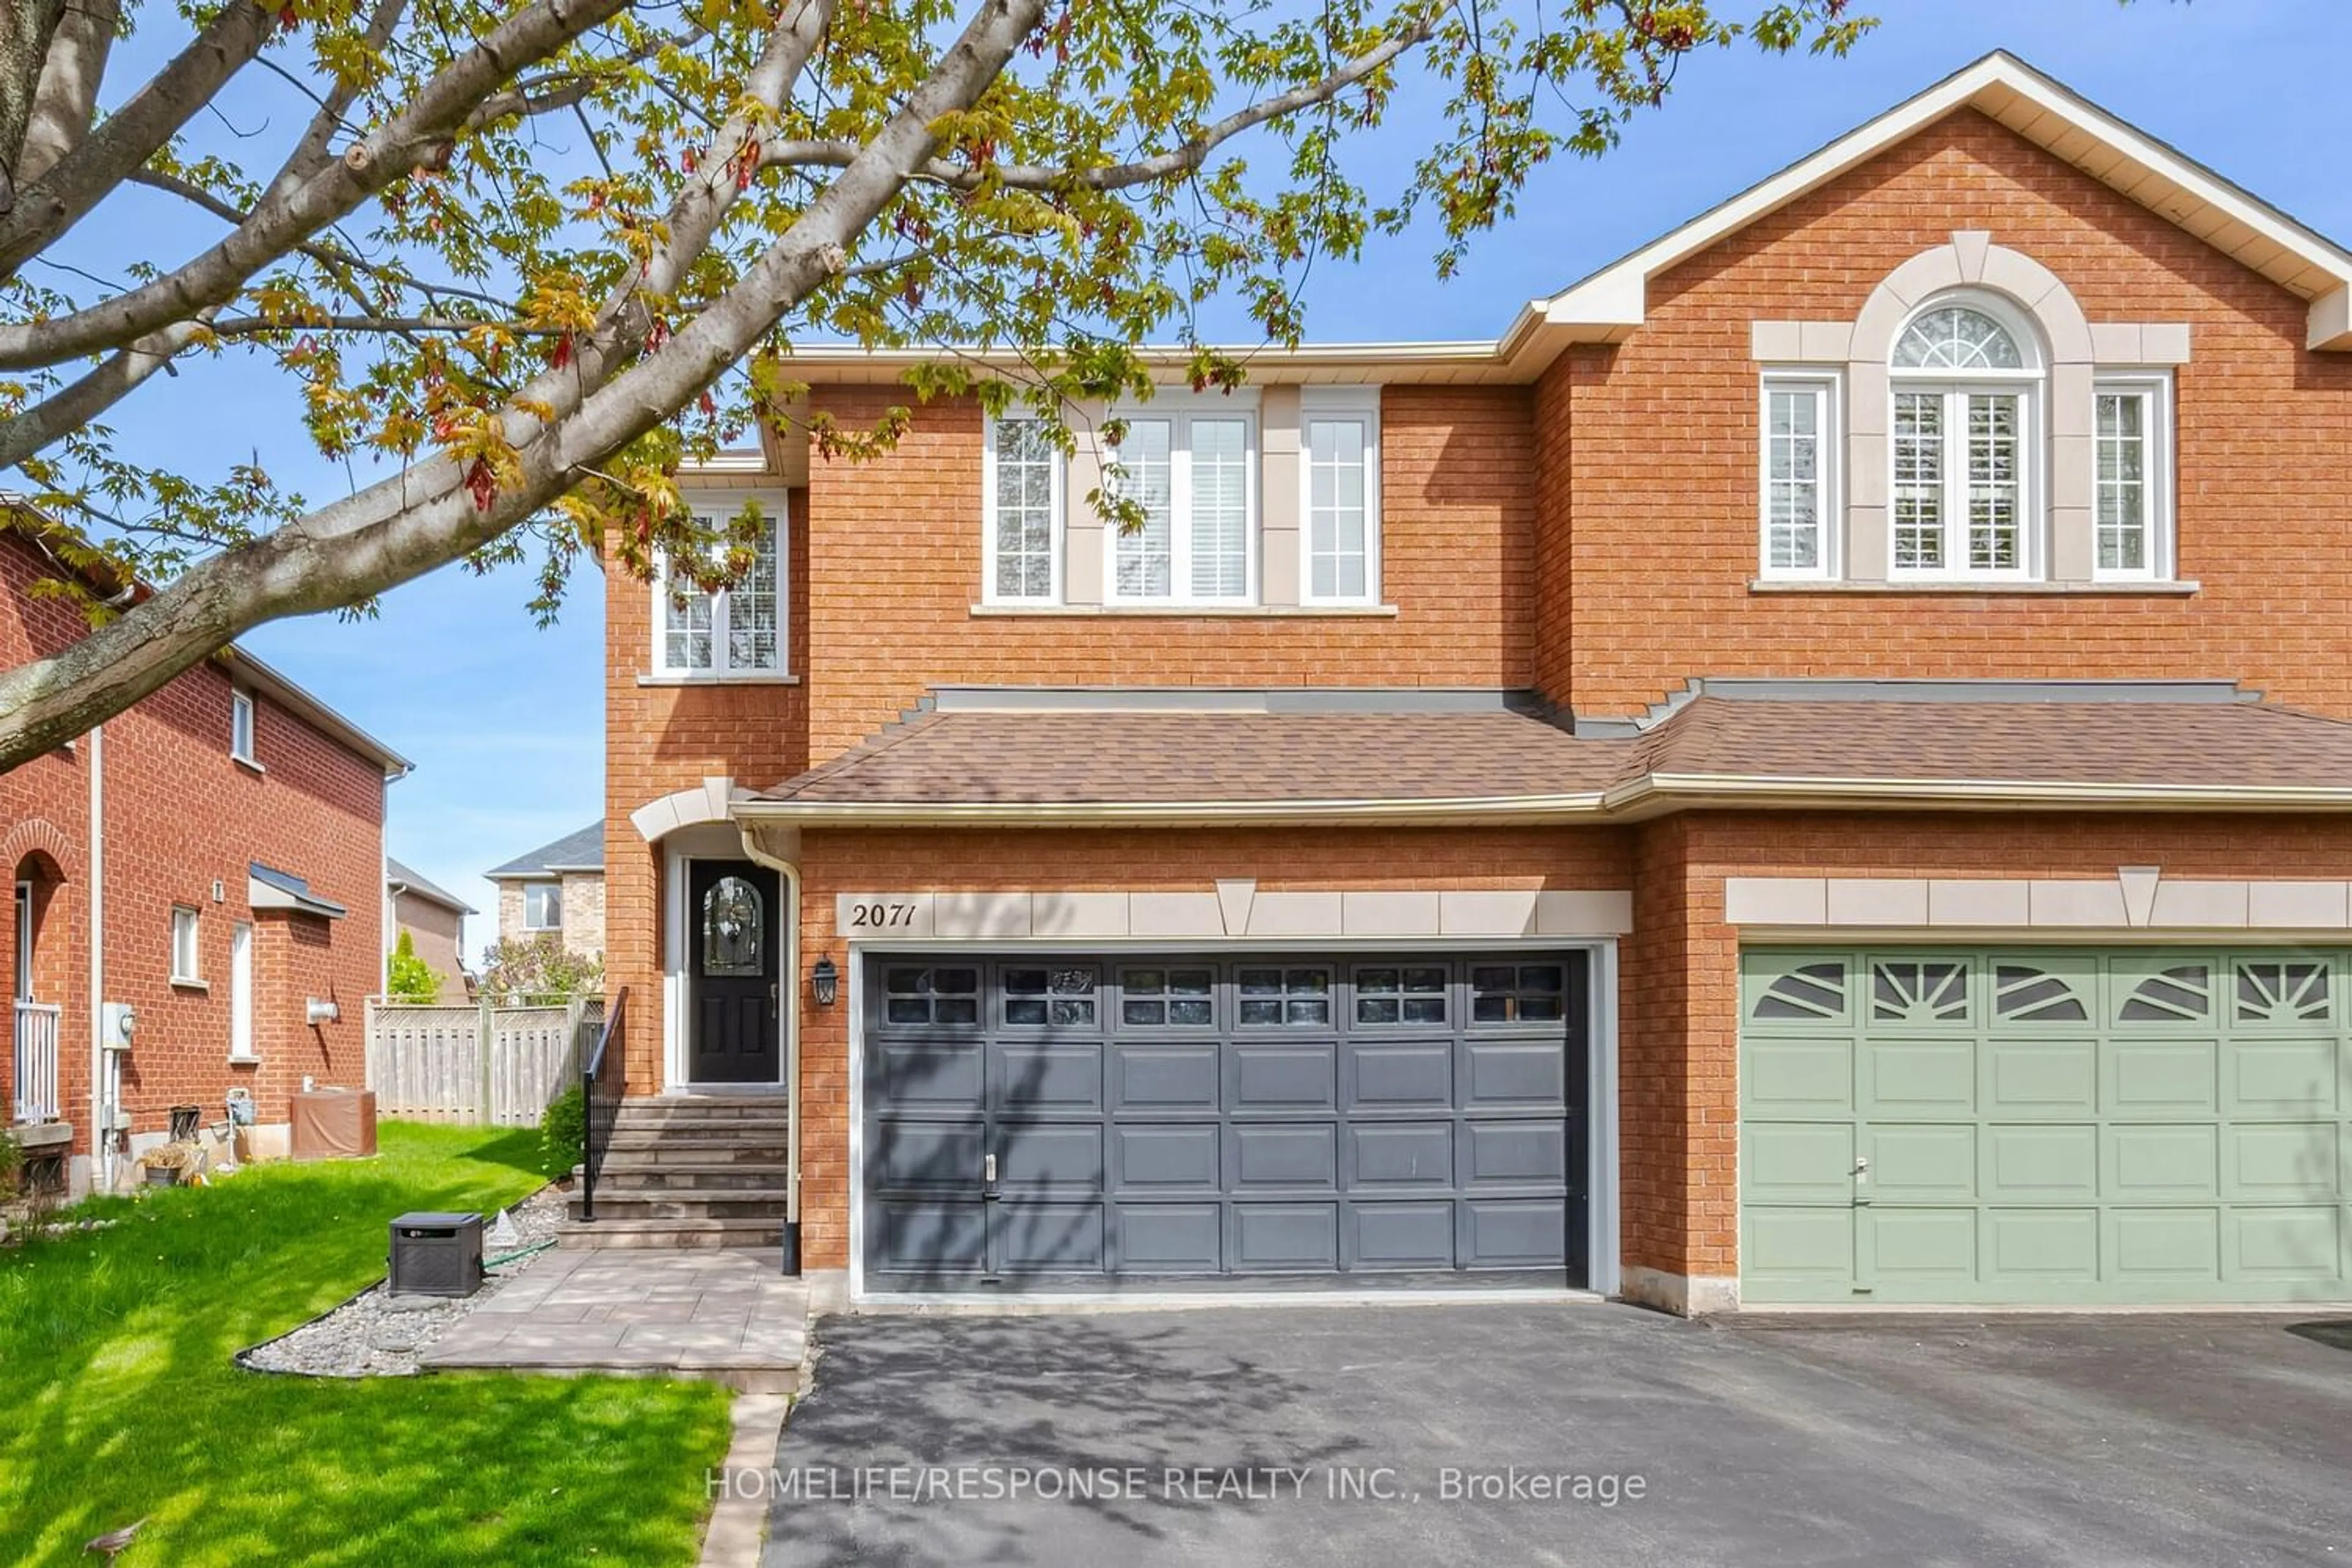 Home with brick exterior material for 2071 Shady Glen Rd, Oakville Ontario L6M 3N5